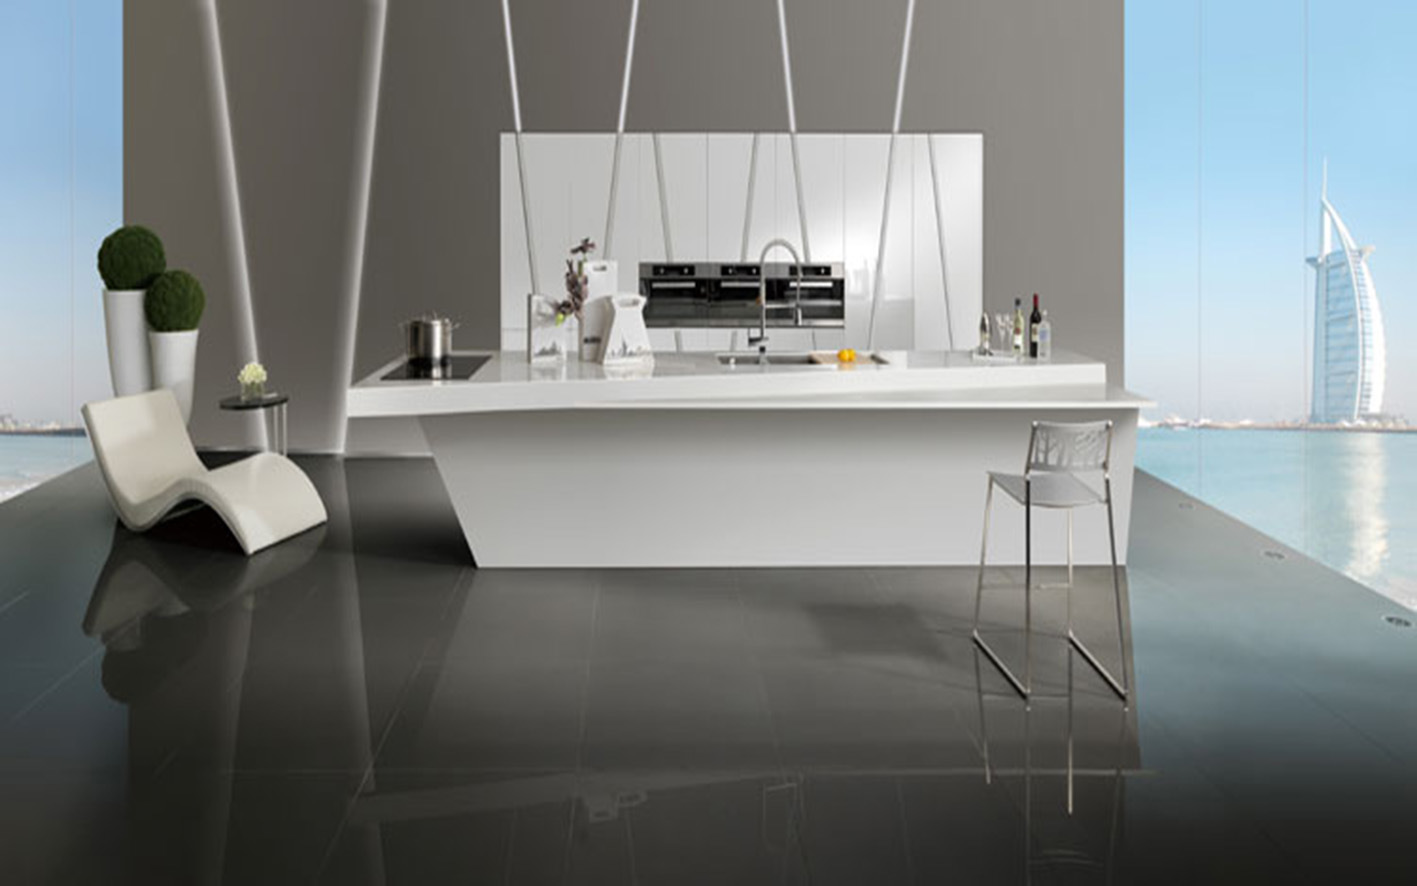 White Lacquer with Wood Grain Flat-Panel Kitchen Cabinets (zz-040)